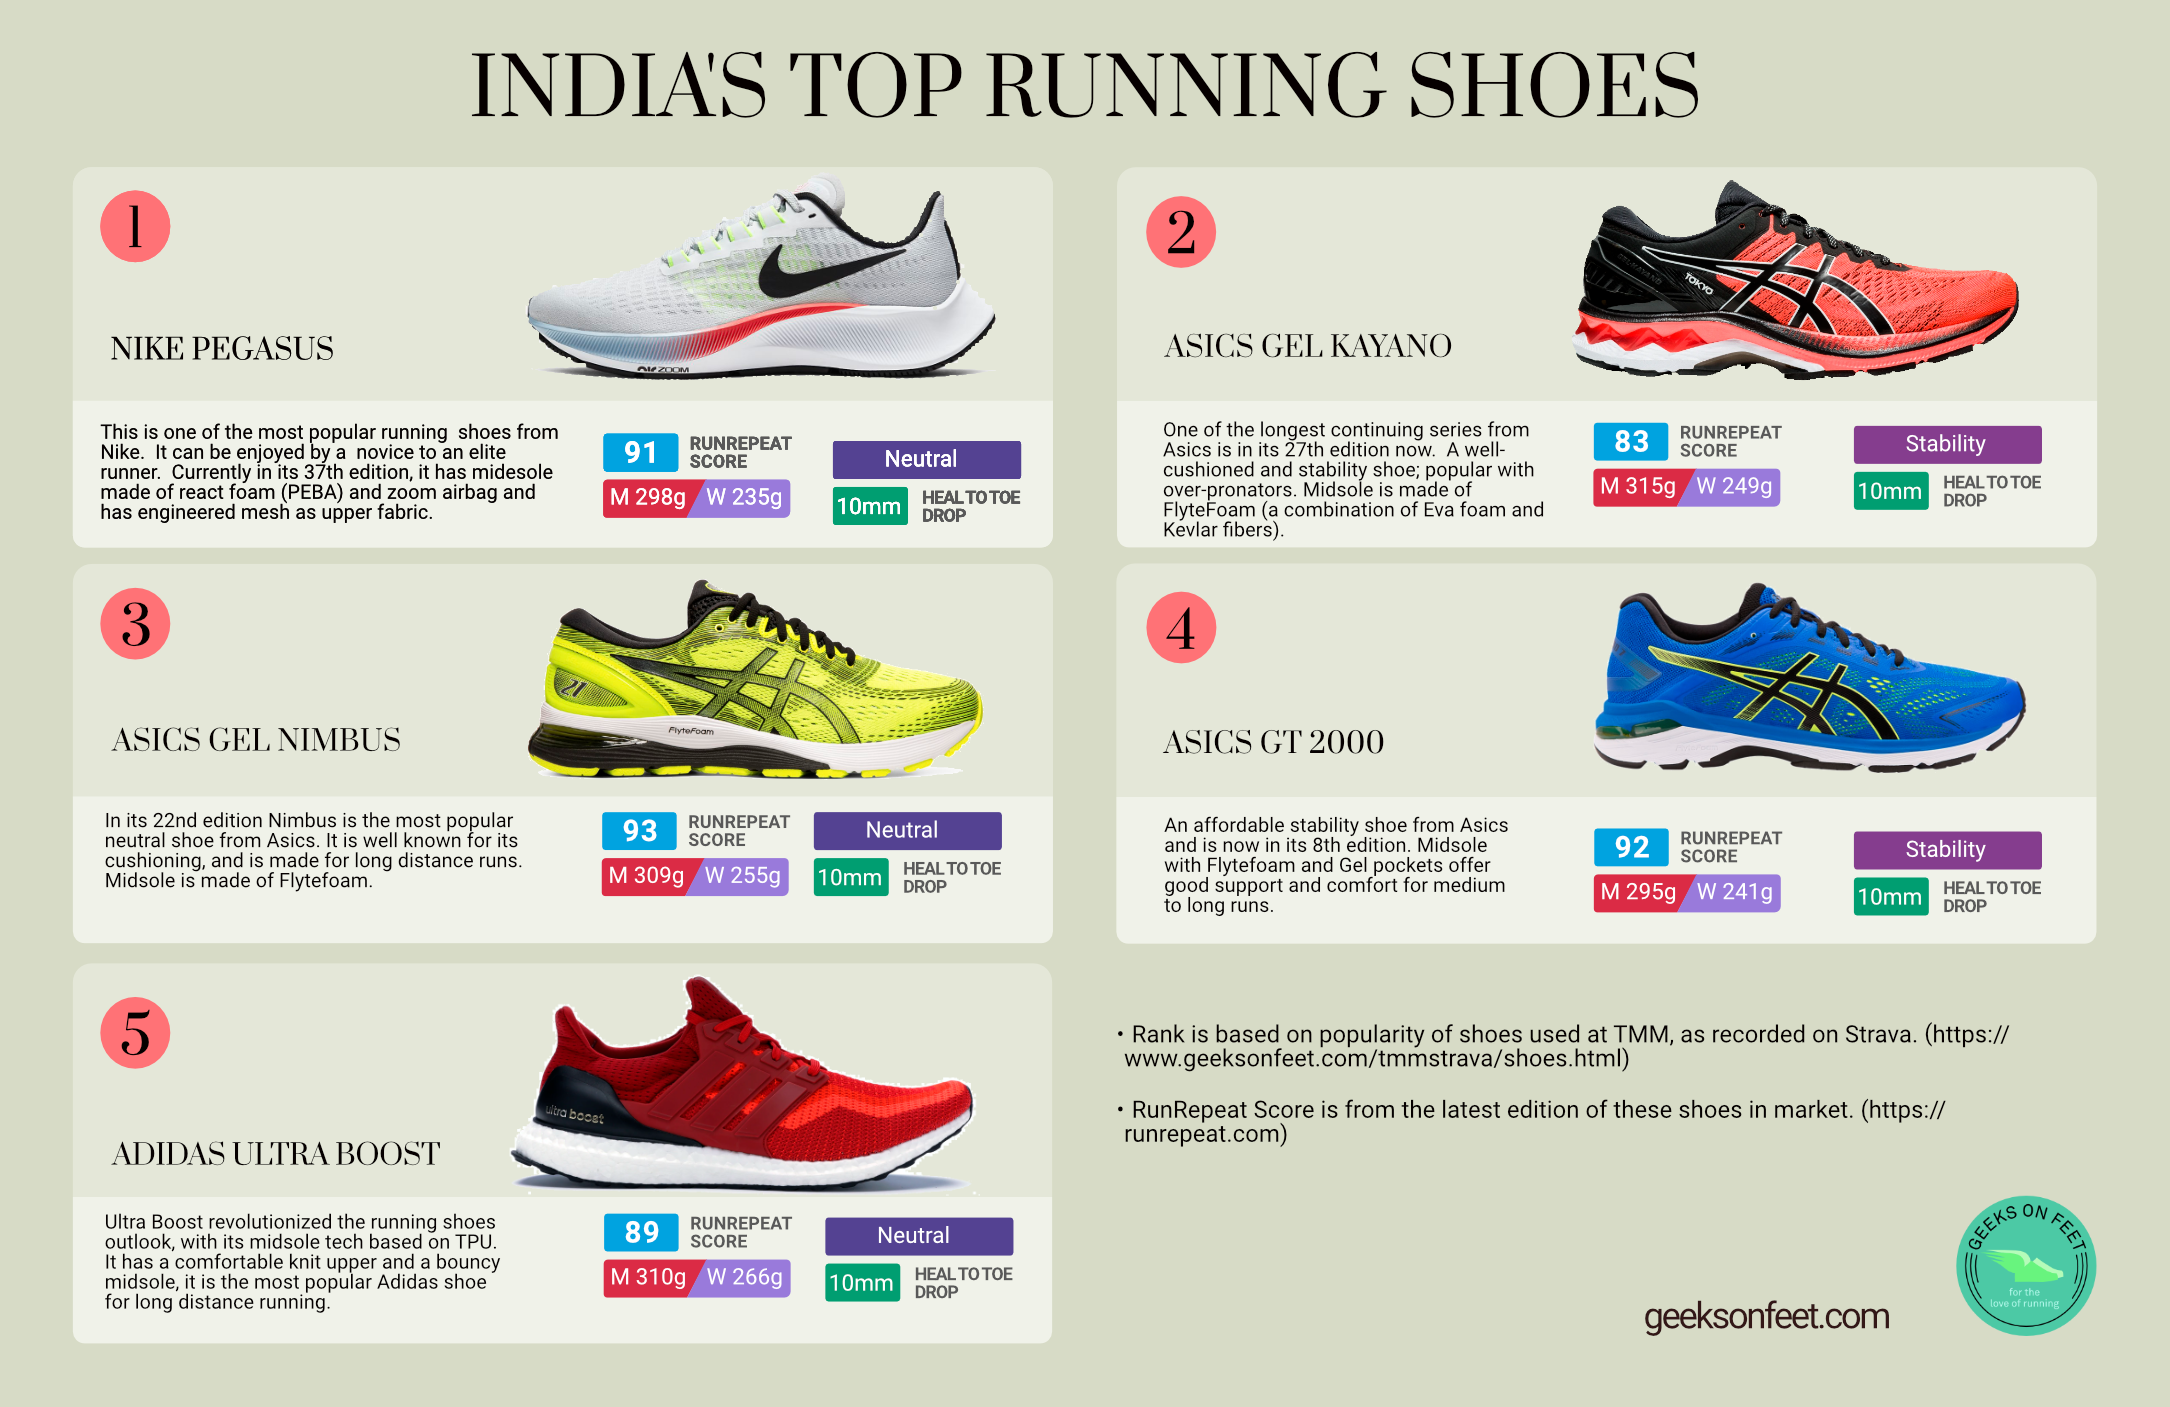 India's Top Running Shoes